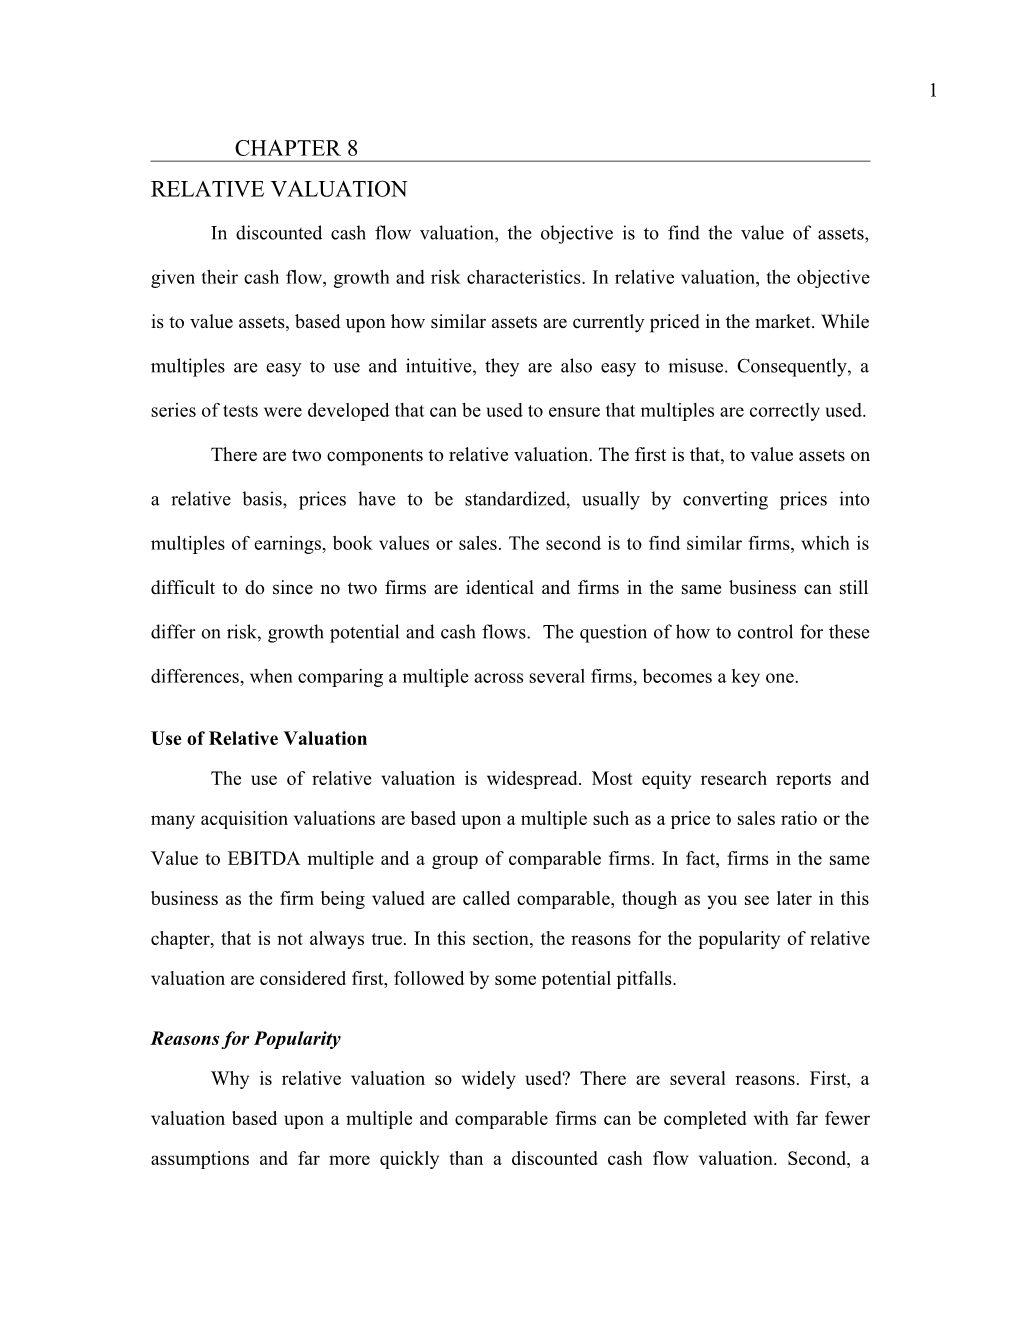 Chapter 8: Relative Valuation & Use Of Relative Valuation